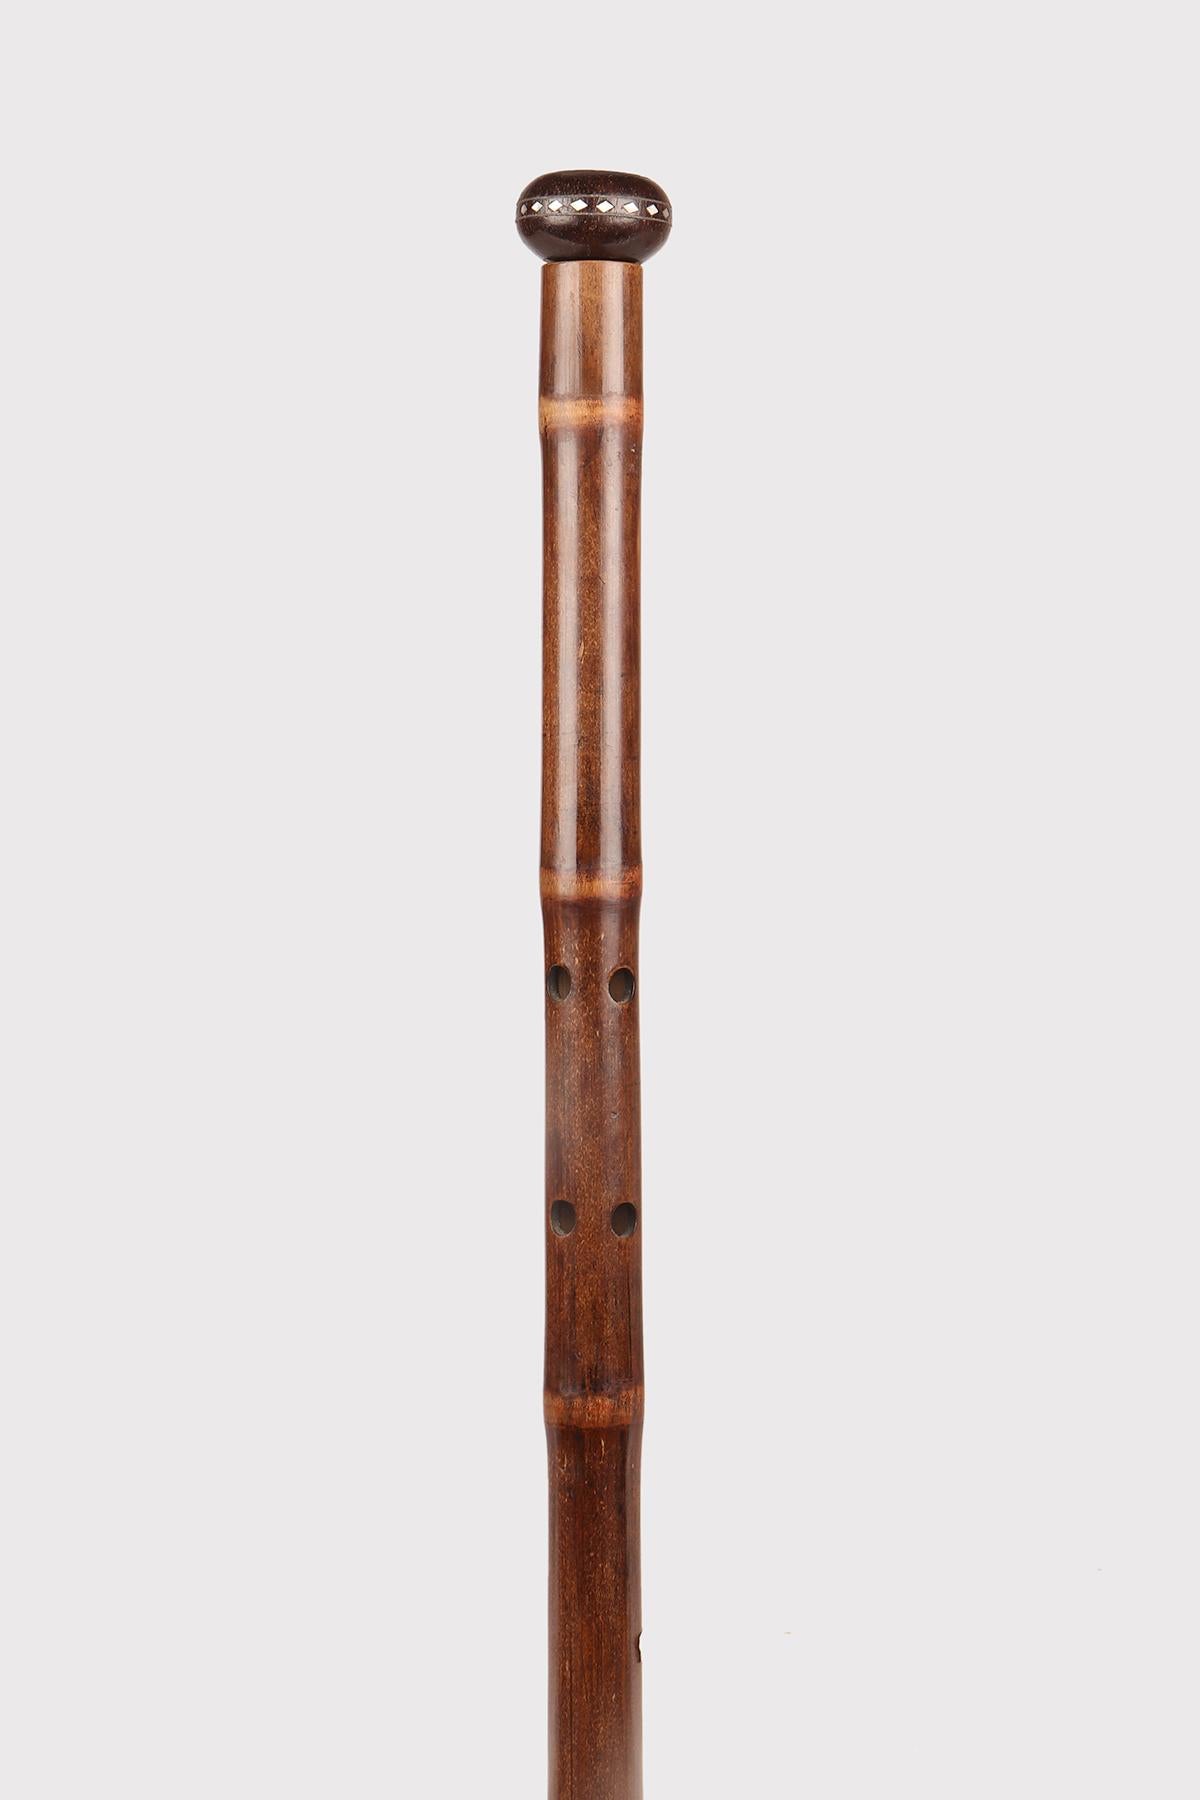 System walking: stick with the function of a musical instrument, the flute. Bamboo wood cane. Wooden and mother-of-pearl knob carved and engraved with E M monogram, brass and iron ferrule. Inside the shell and cable, and the holes allow you to play